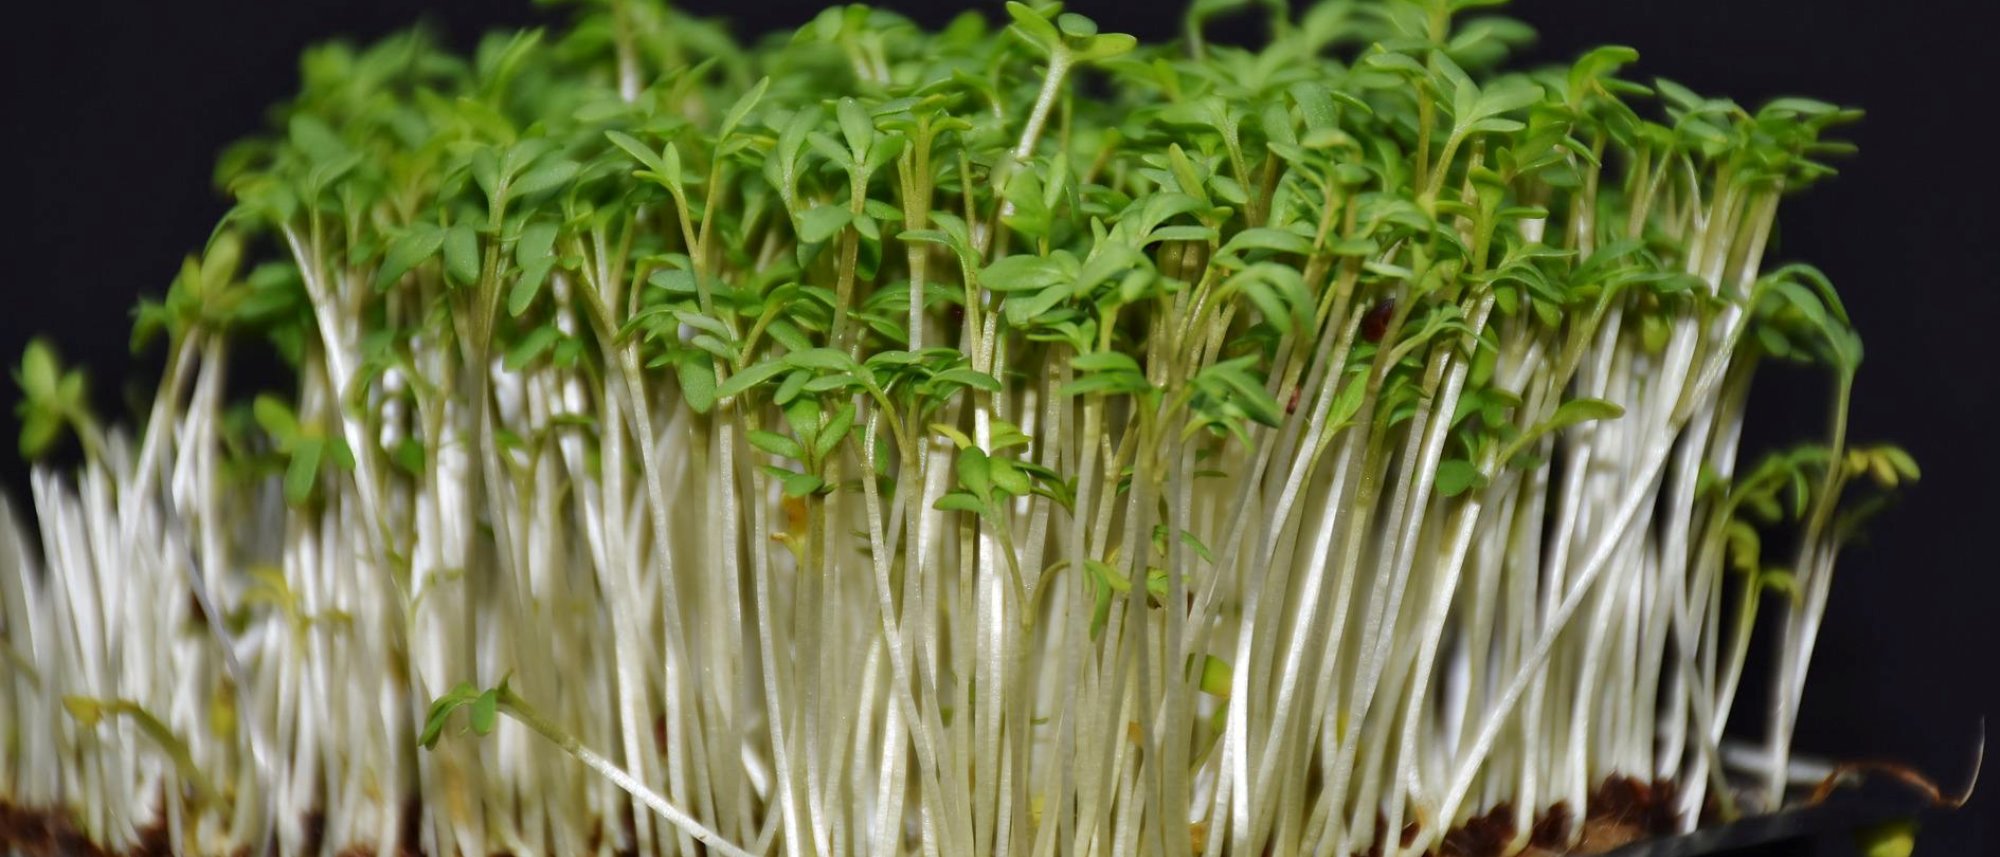 Grow your own spicy and nutritious sprouts at home